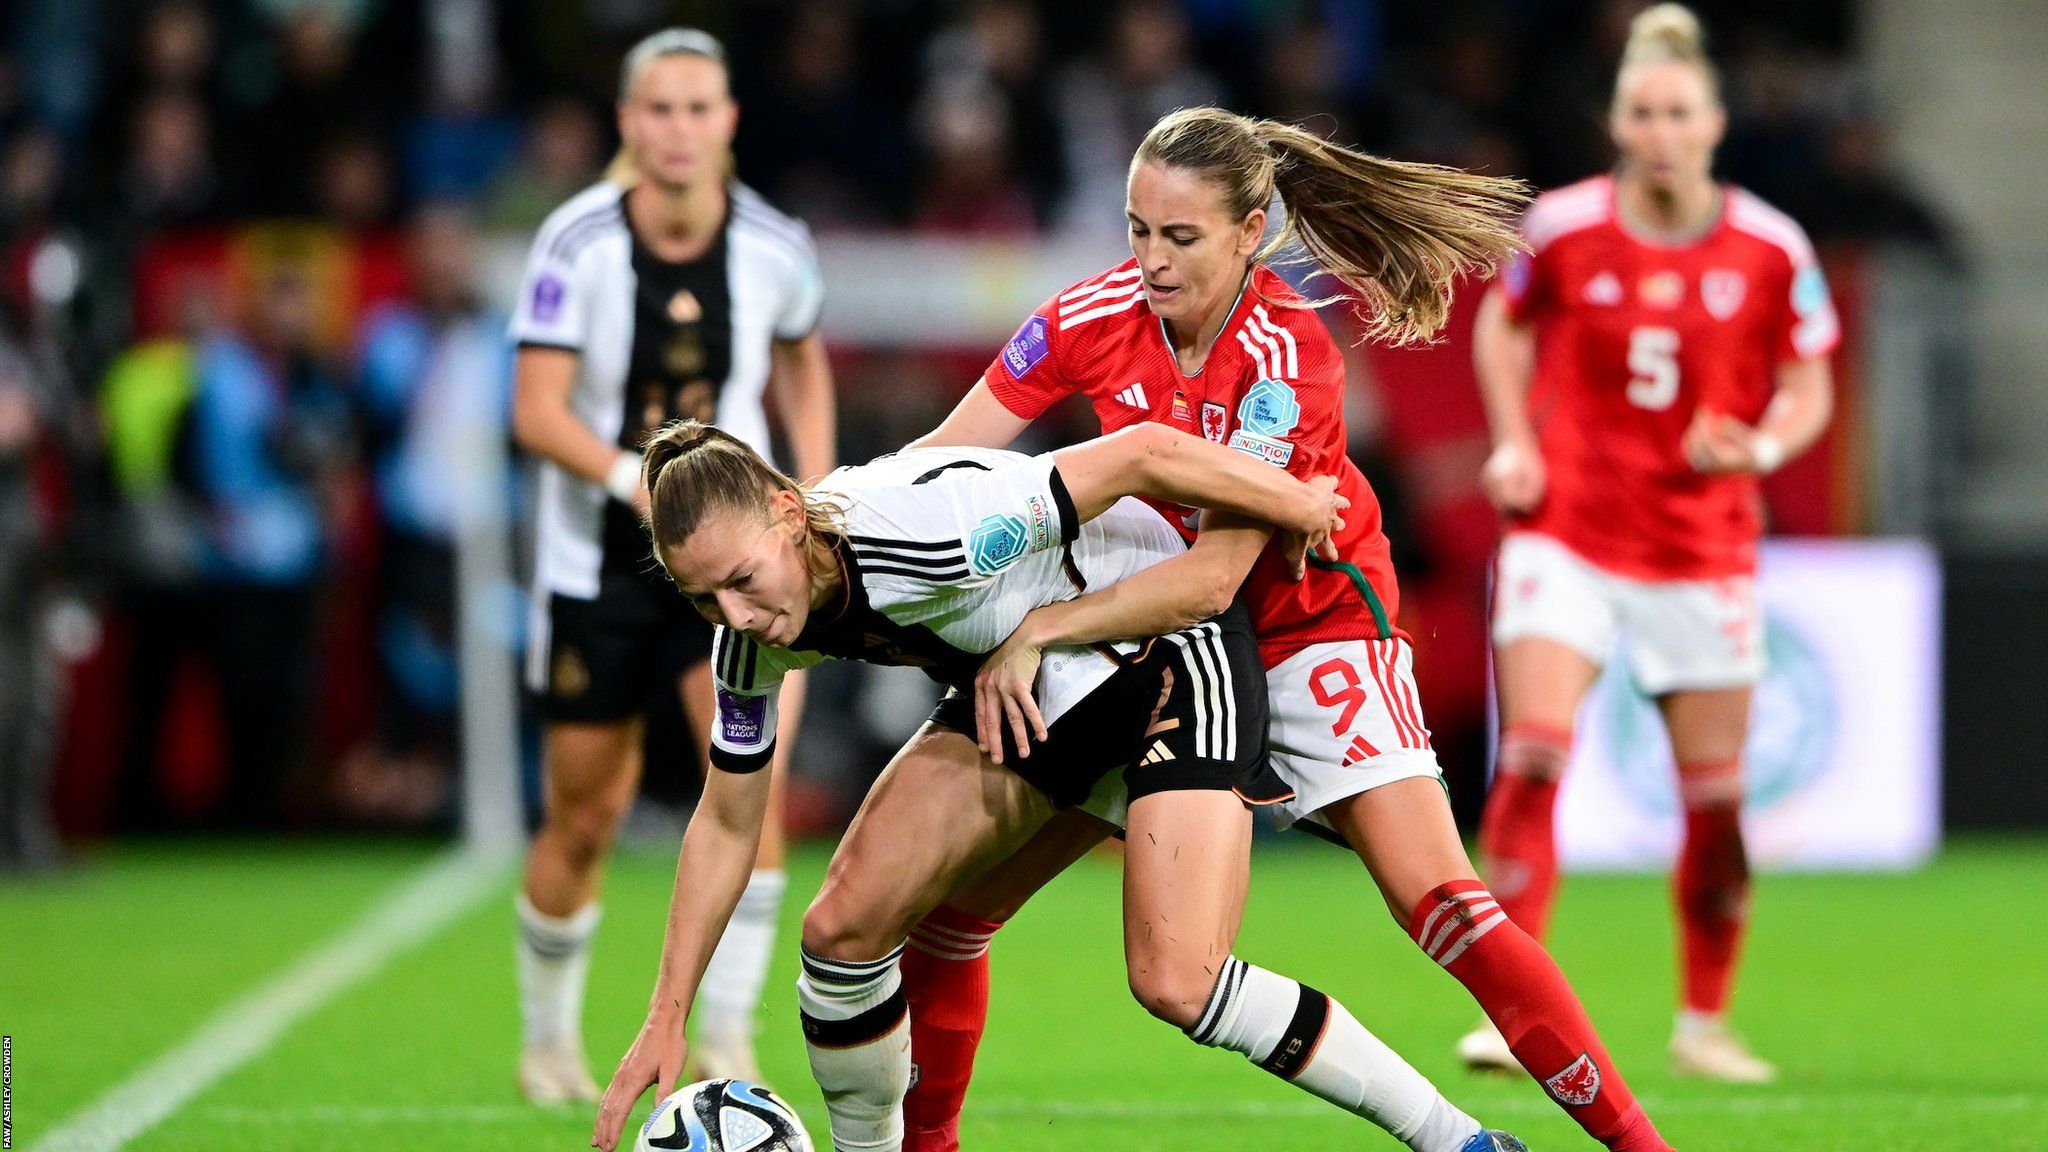 Germany’s Sarai Linder is fouled by Wales' Kayleigh Green